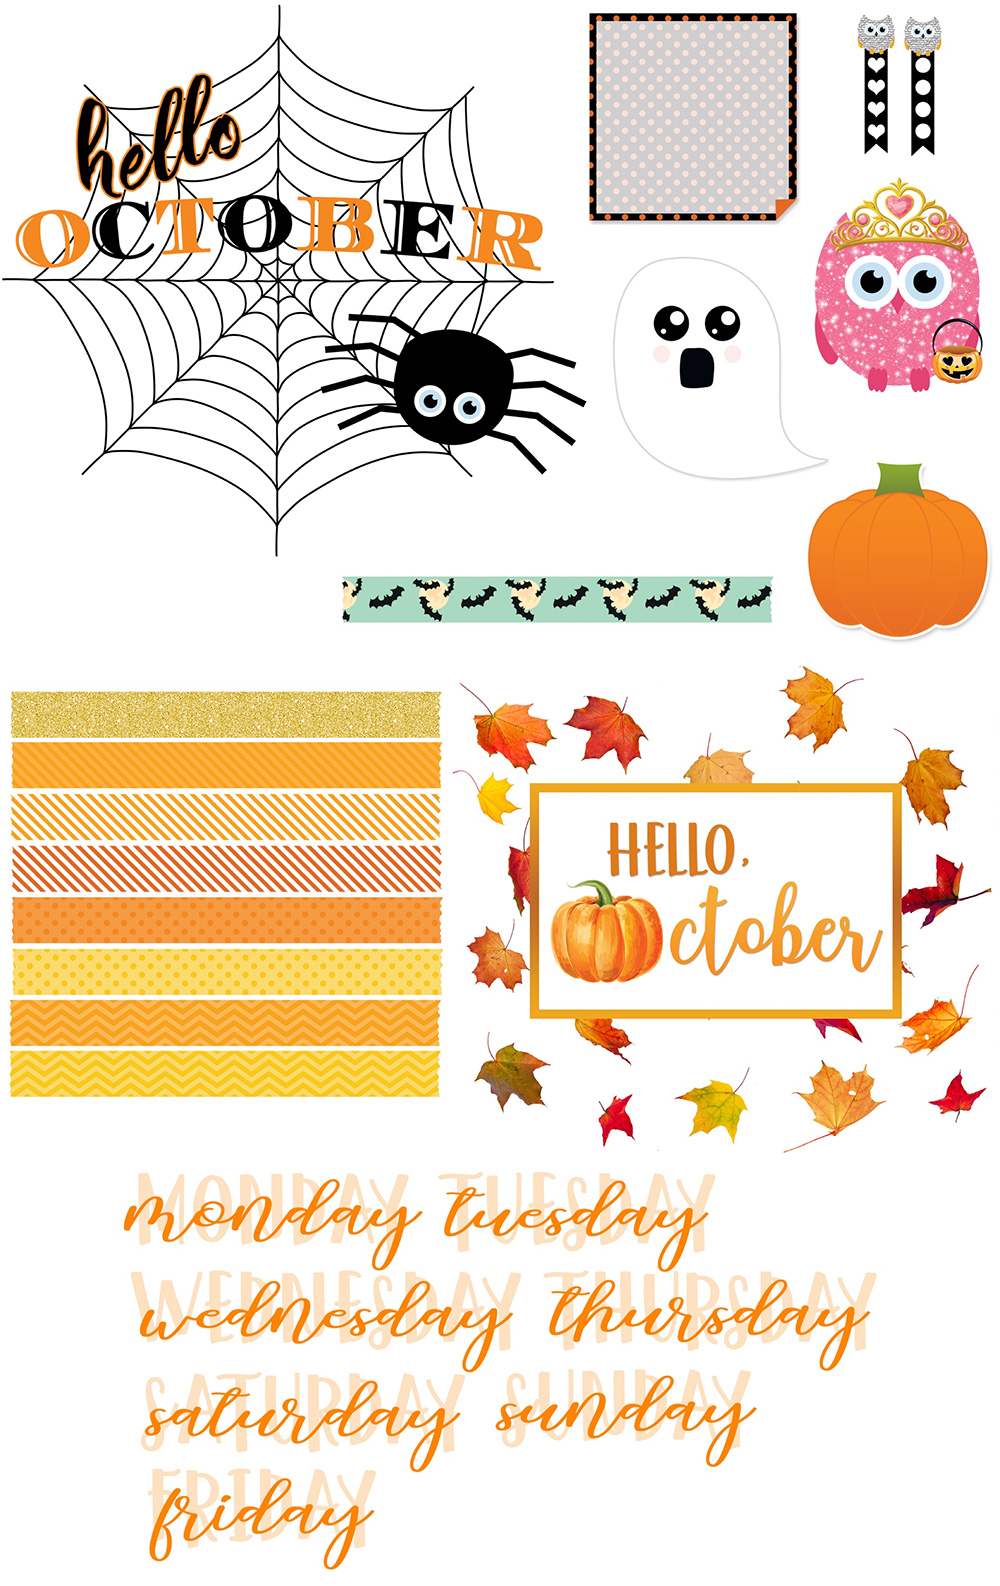 October Calling - FREE Planner Stickers